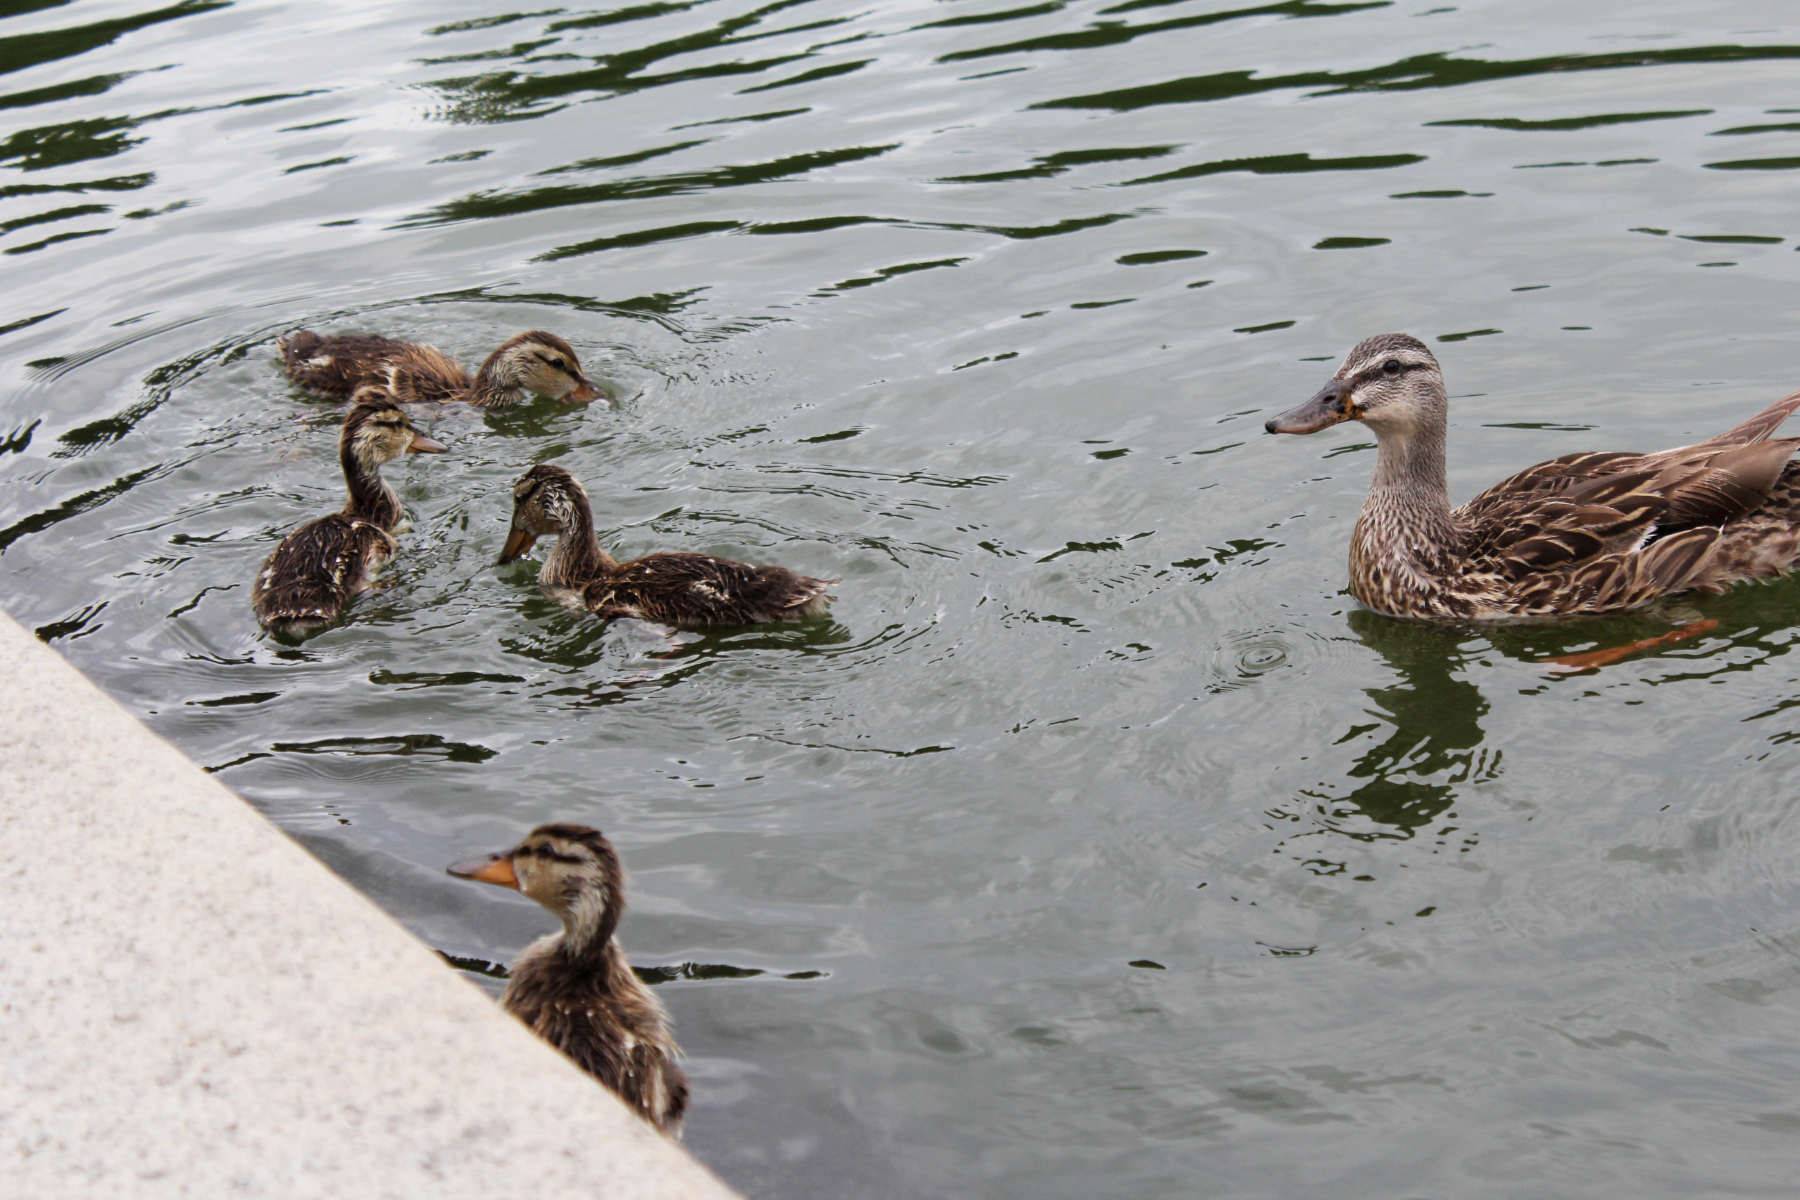 Alternative angle of ducks in the reflecting pool